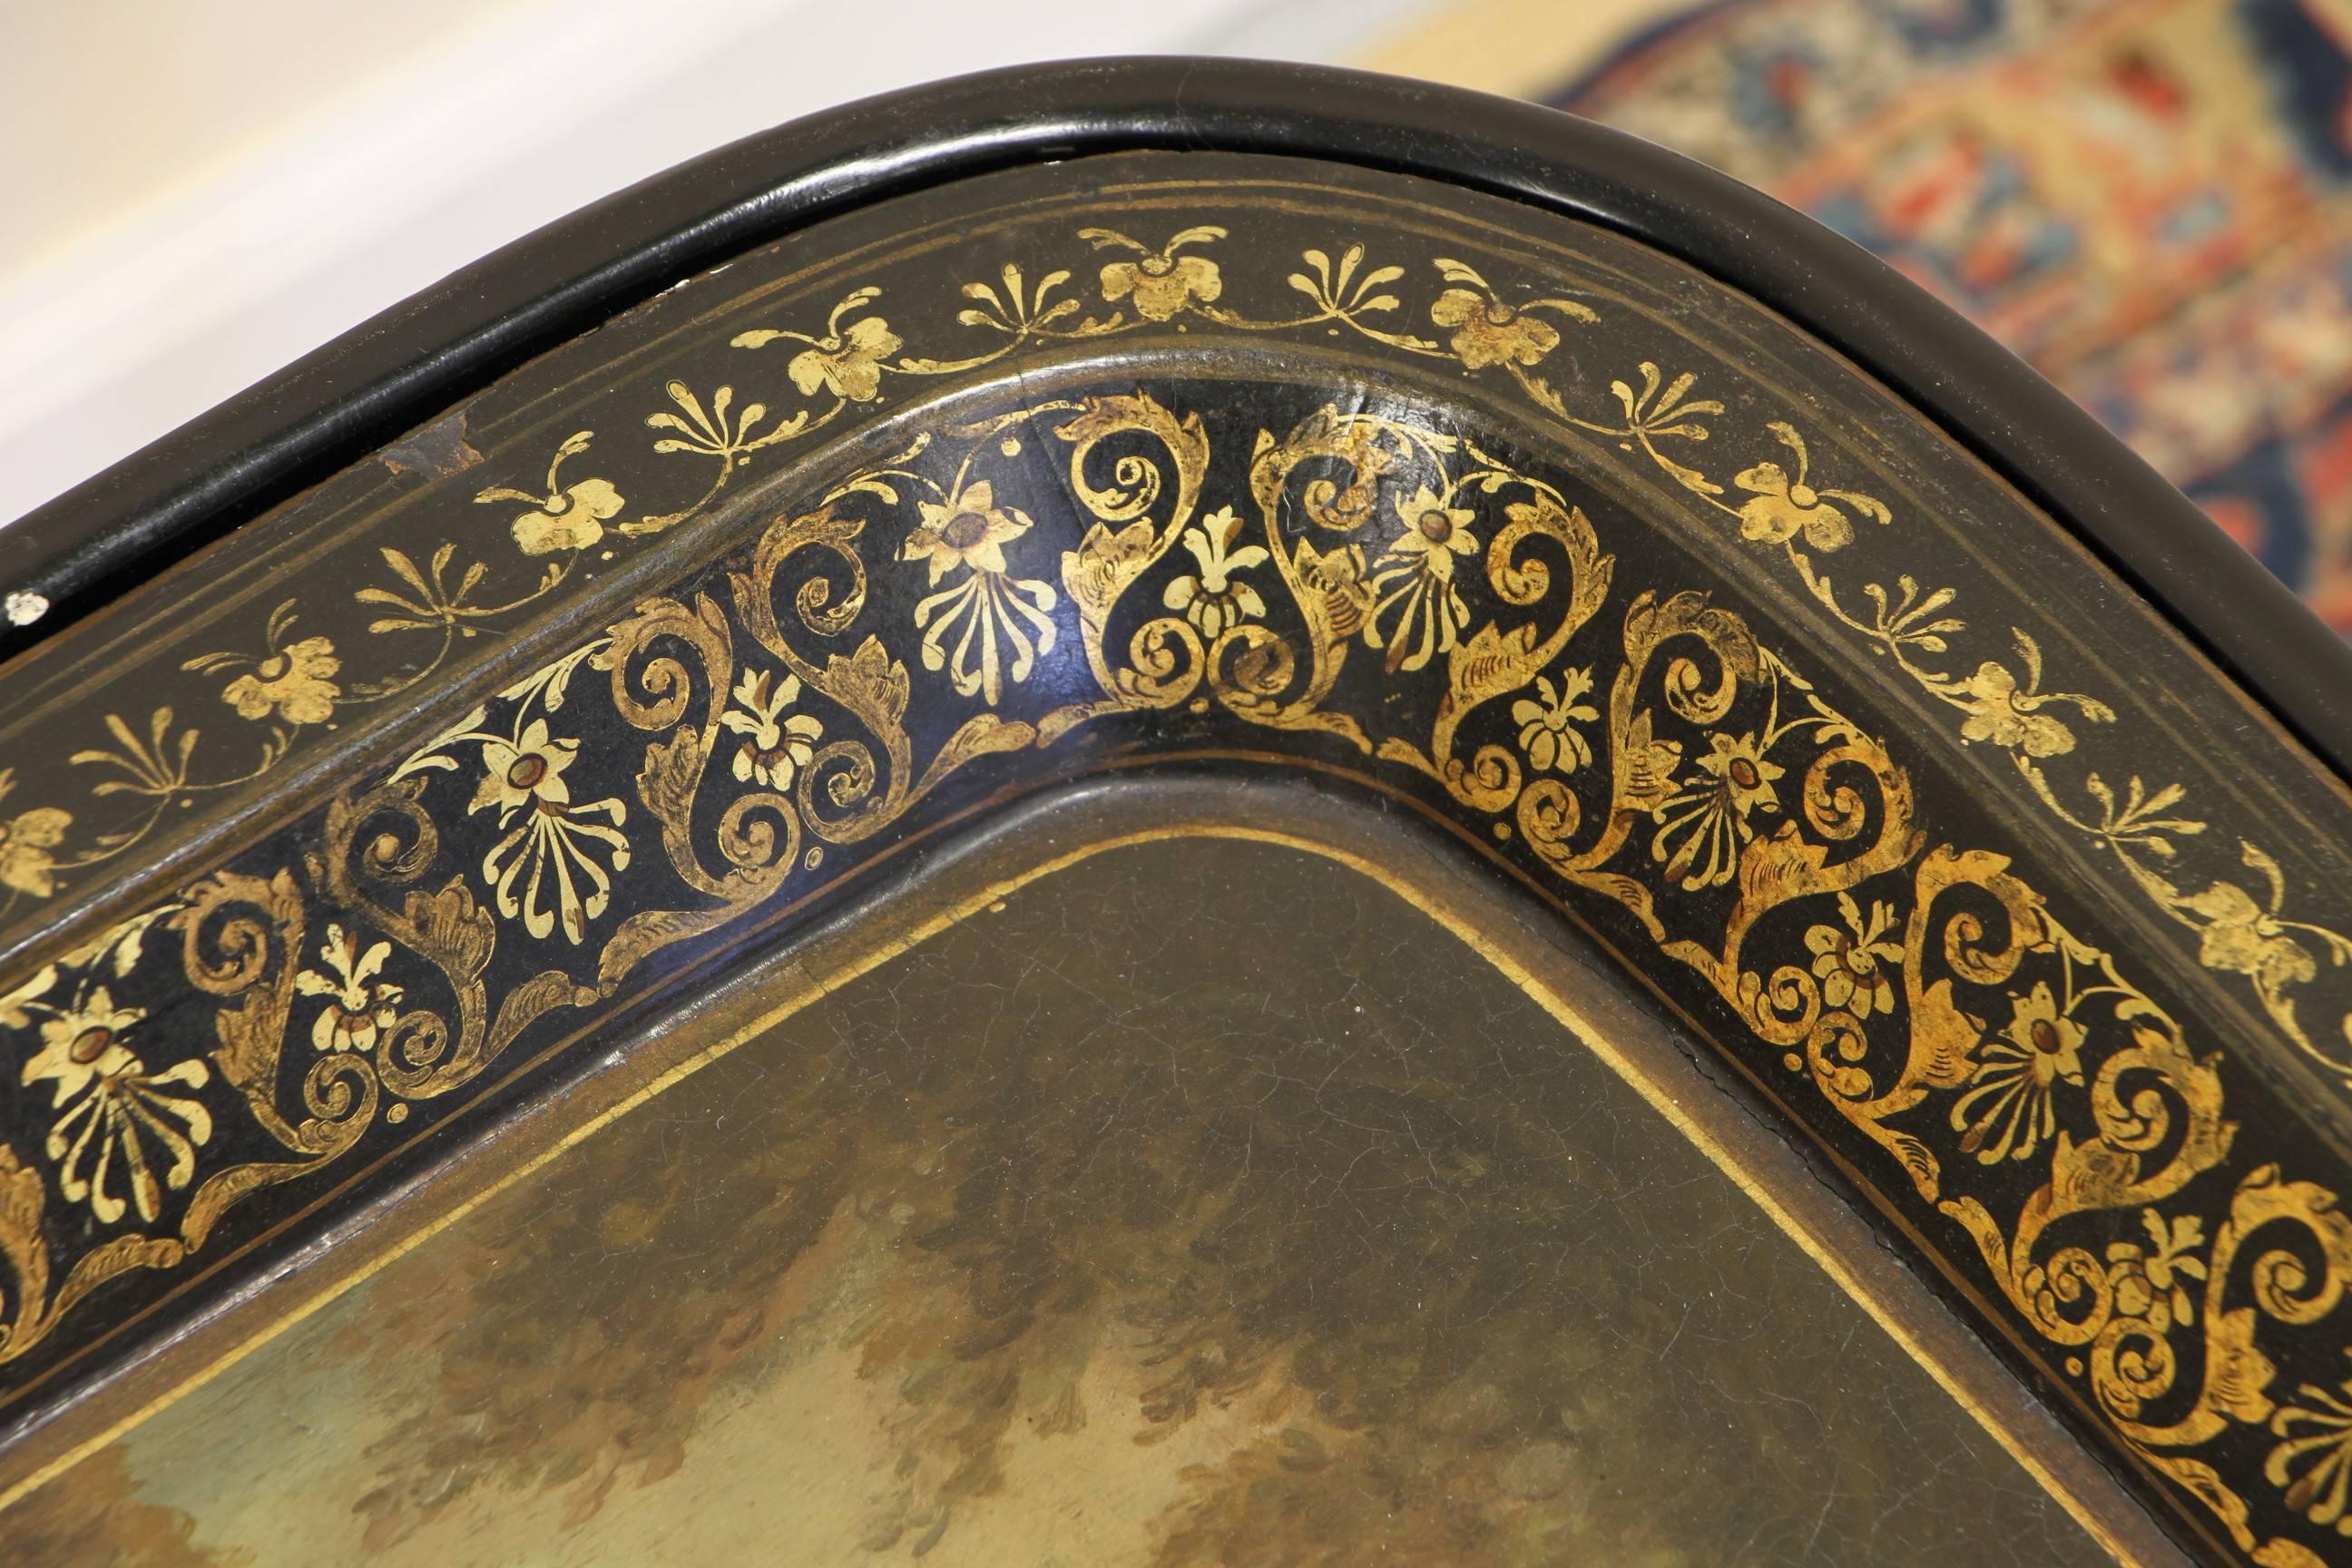 English 19th Century Papier Mâché Tray on Later Regency Style Stand